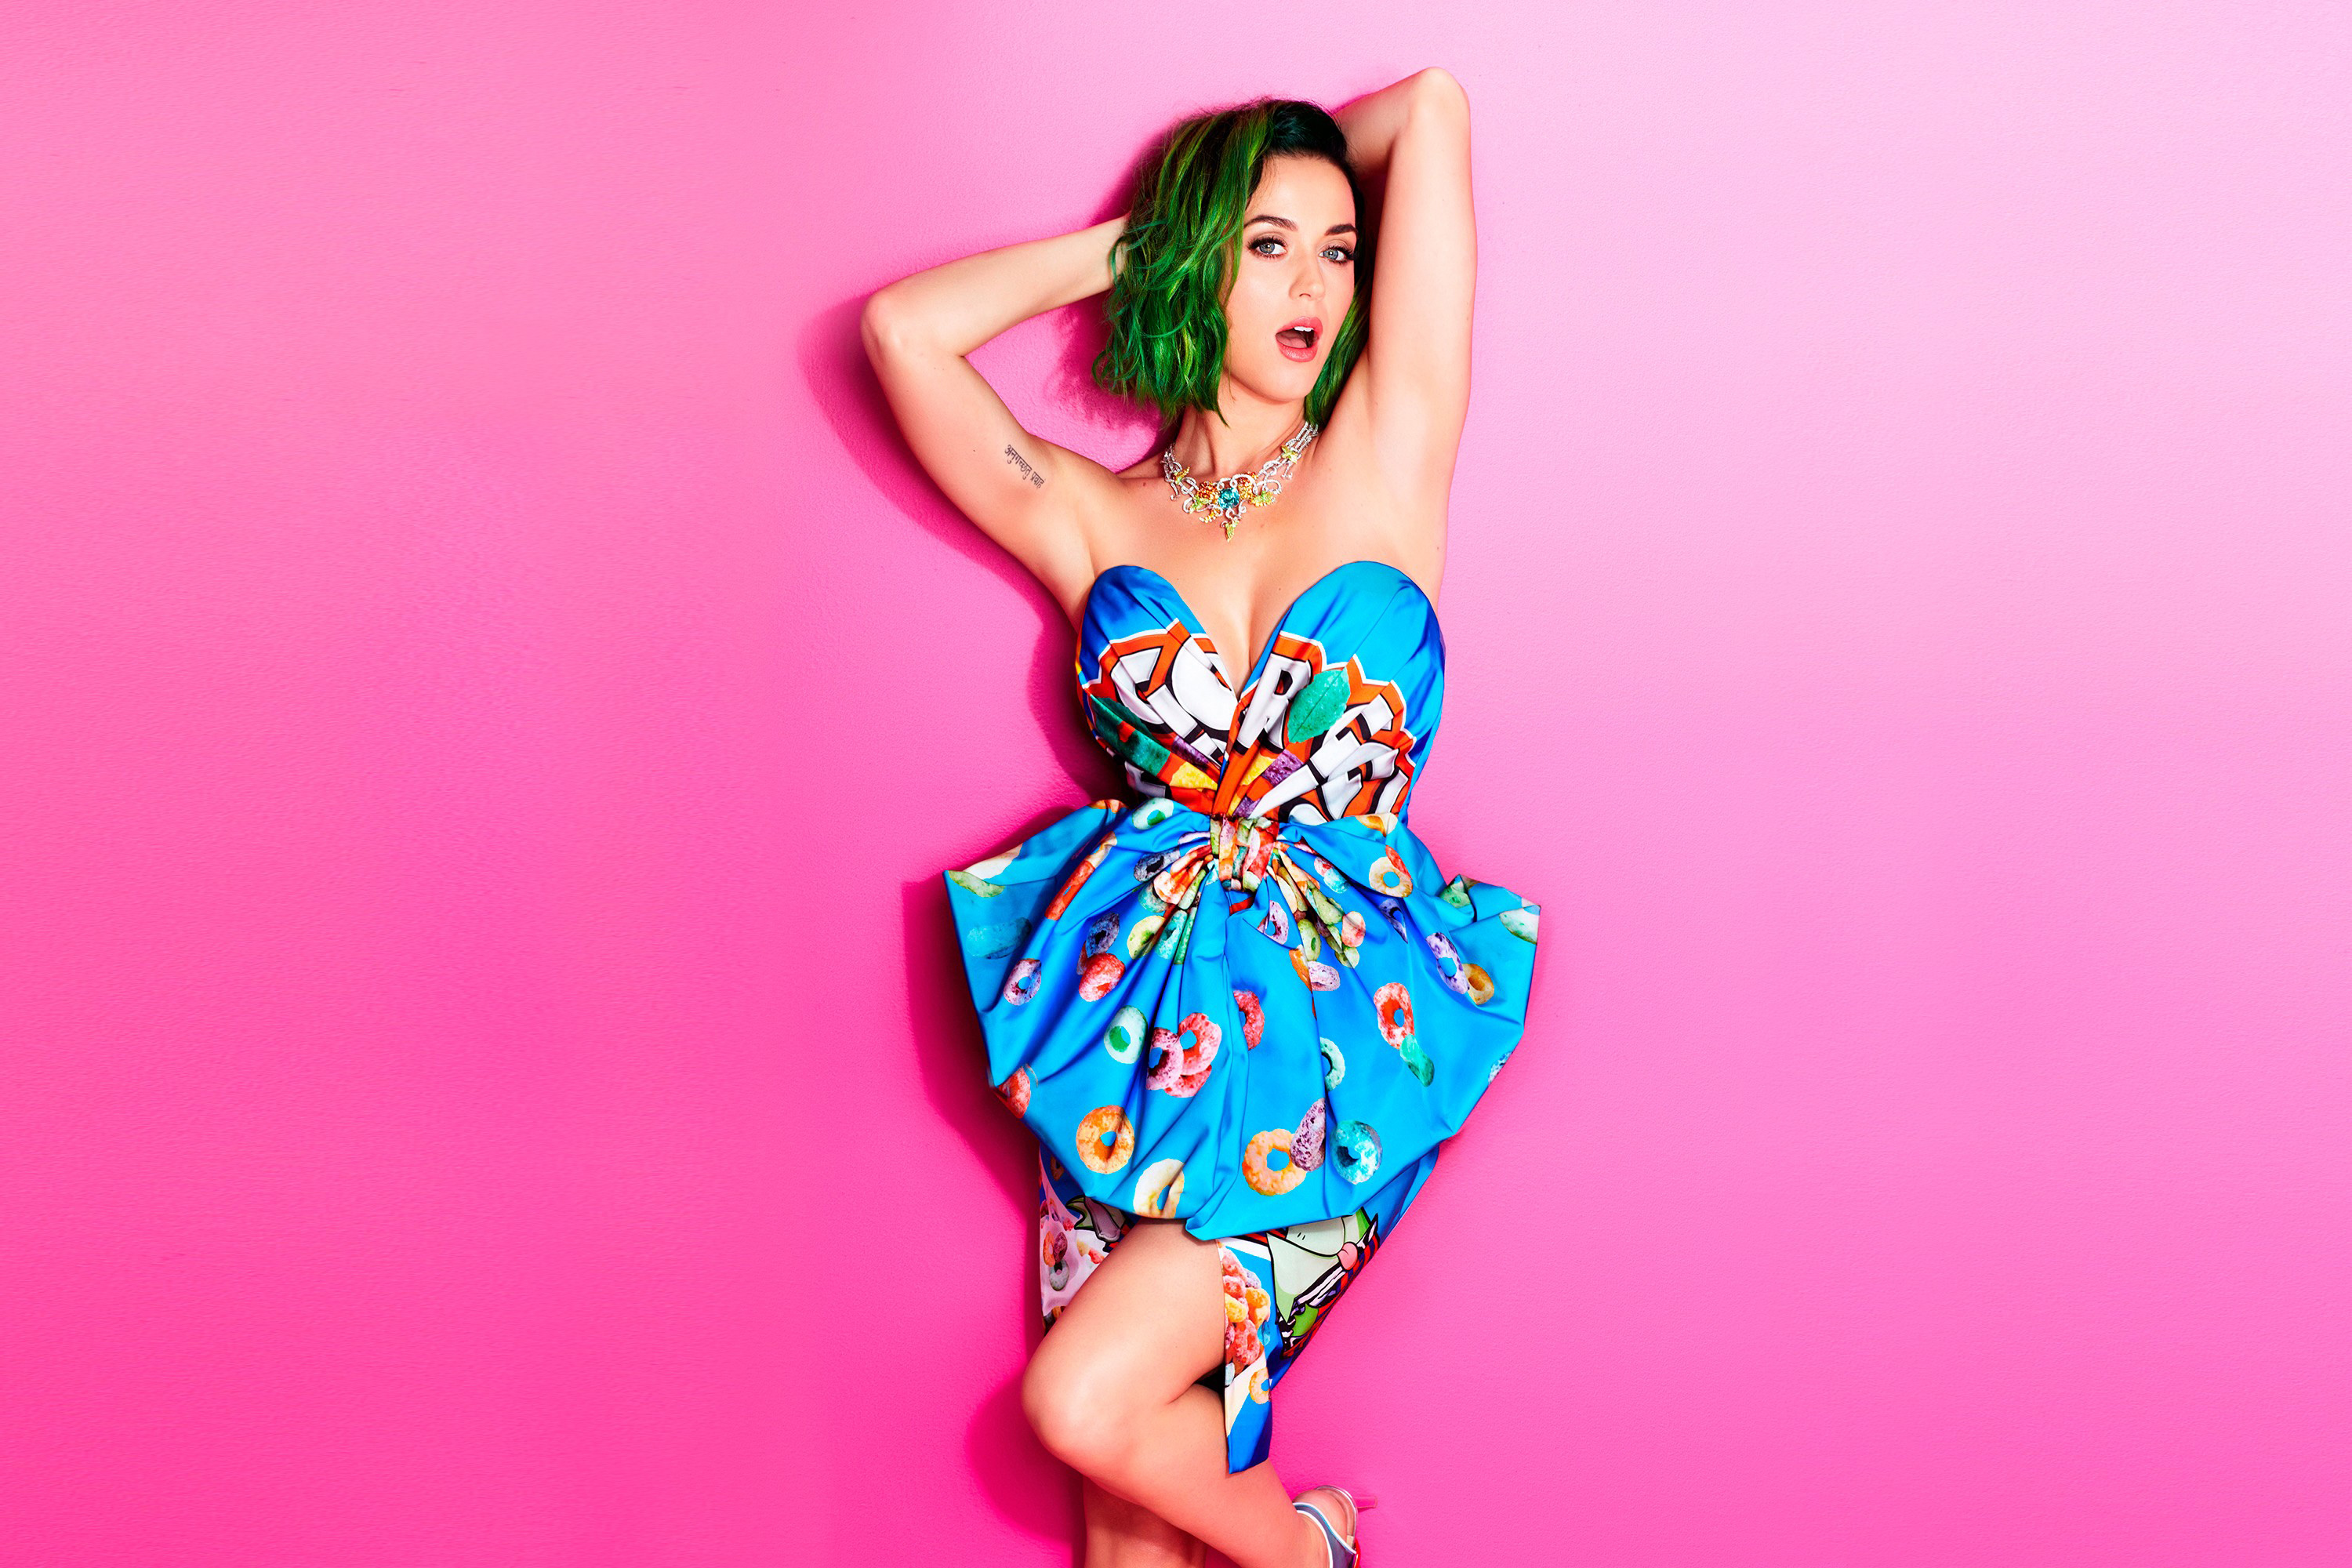 Katy Perry hot wallpaper  High Definition High Resolution HD Wallpapers   High Definition High Resolution HD Wallpapers